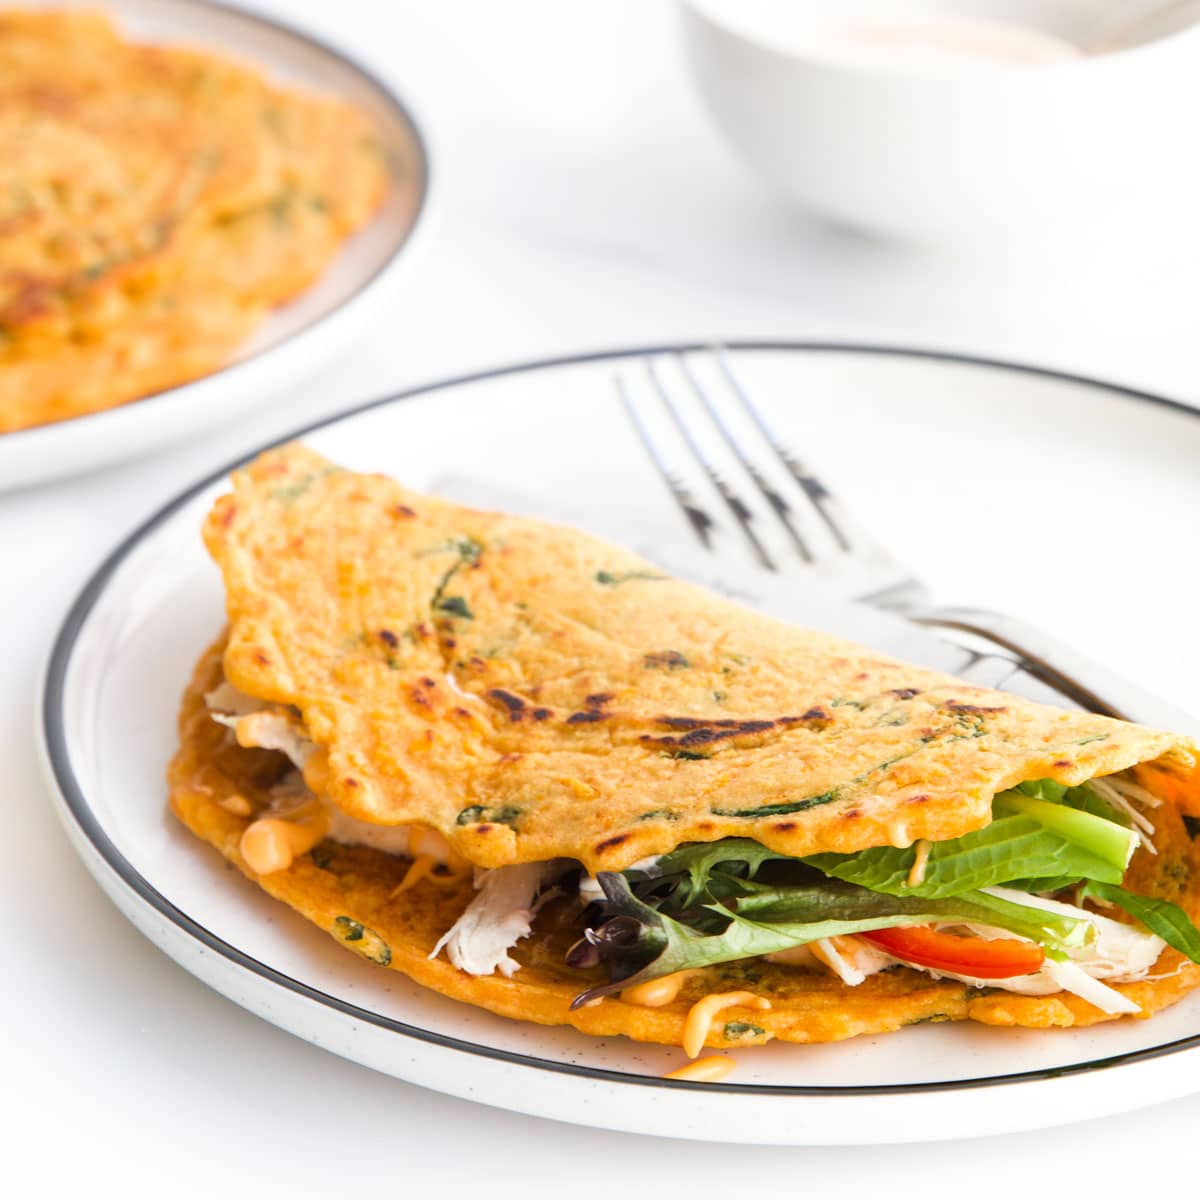 Crepe Style Red Lentil Pancake Filled with Salad Folded Over on White Plate.